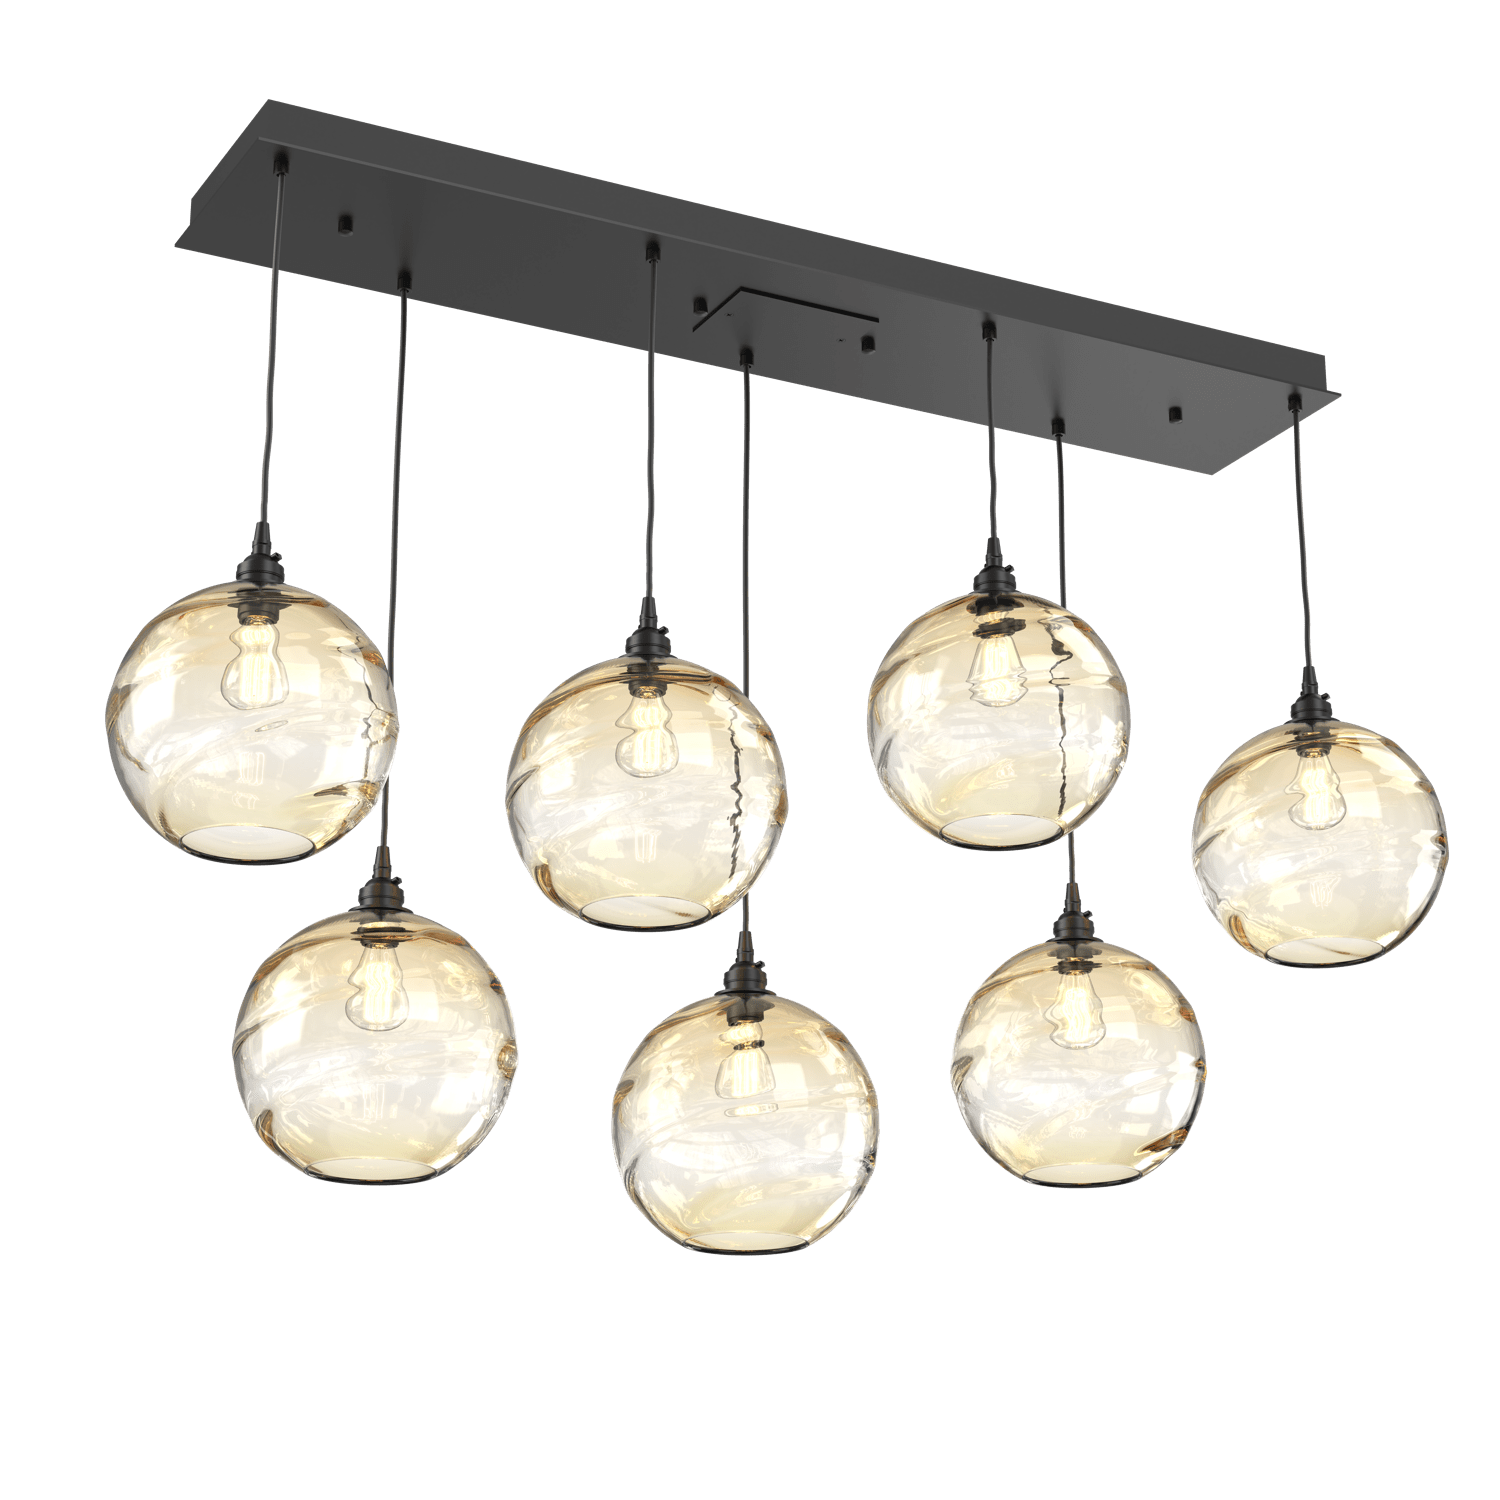 PLB0047-07-MB-OA-Hammerton-Studio-Optic-Blown-Glass-Terra-7-light-linear-pendant-chandelier-with-matte-black-finish-and-optic-amber-blown-glass-shades-and-incandescent-lamping